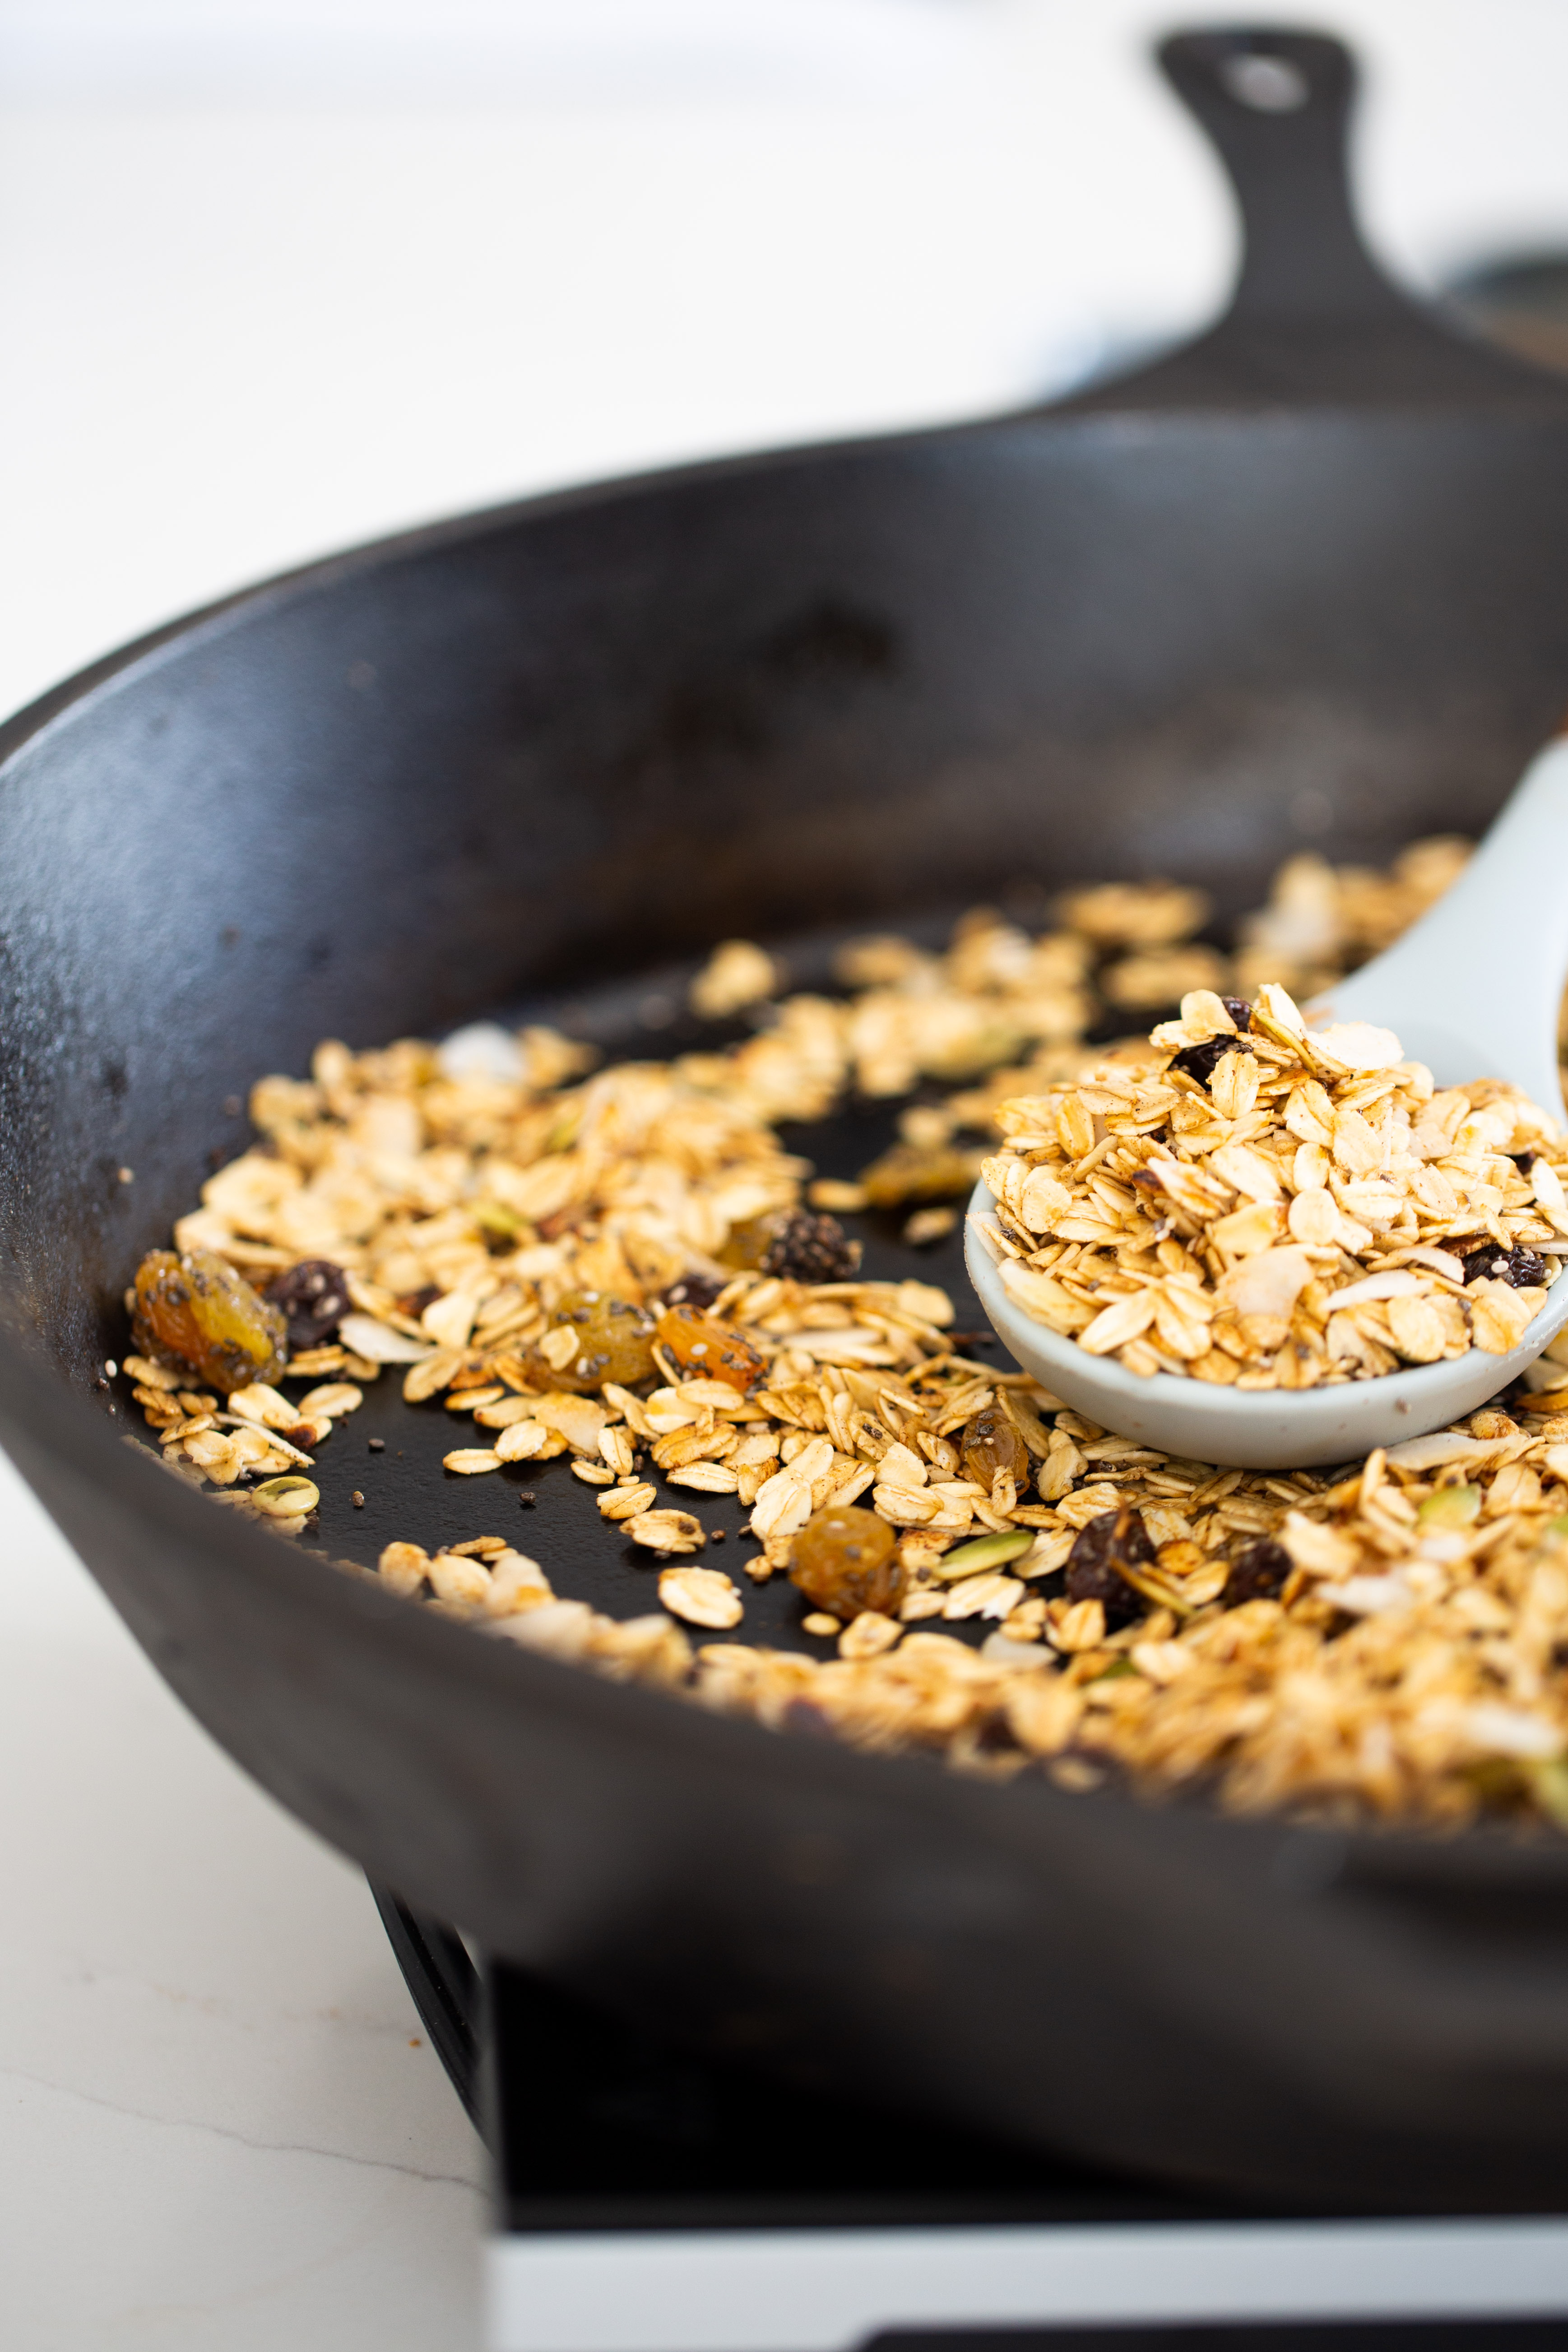 This recipe for stovetop granola in five minutes is one of my household vegan breakfast favorites. It is nutritious, easy to make, and extremely delicious.